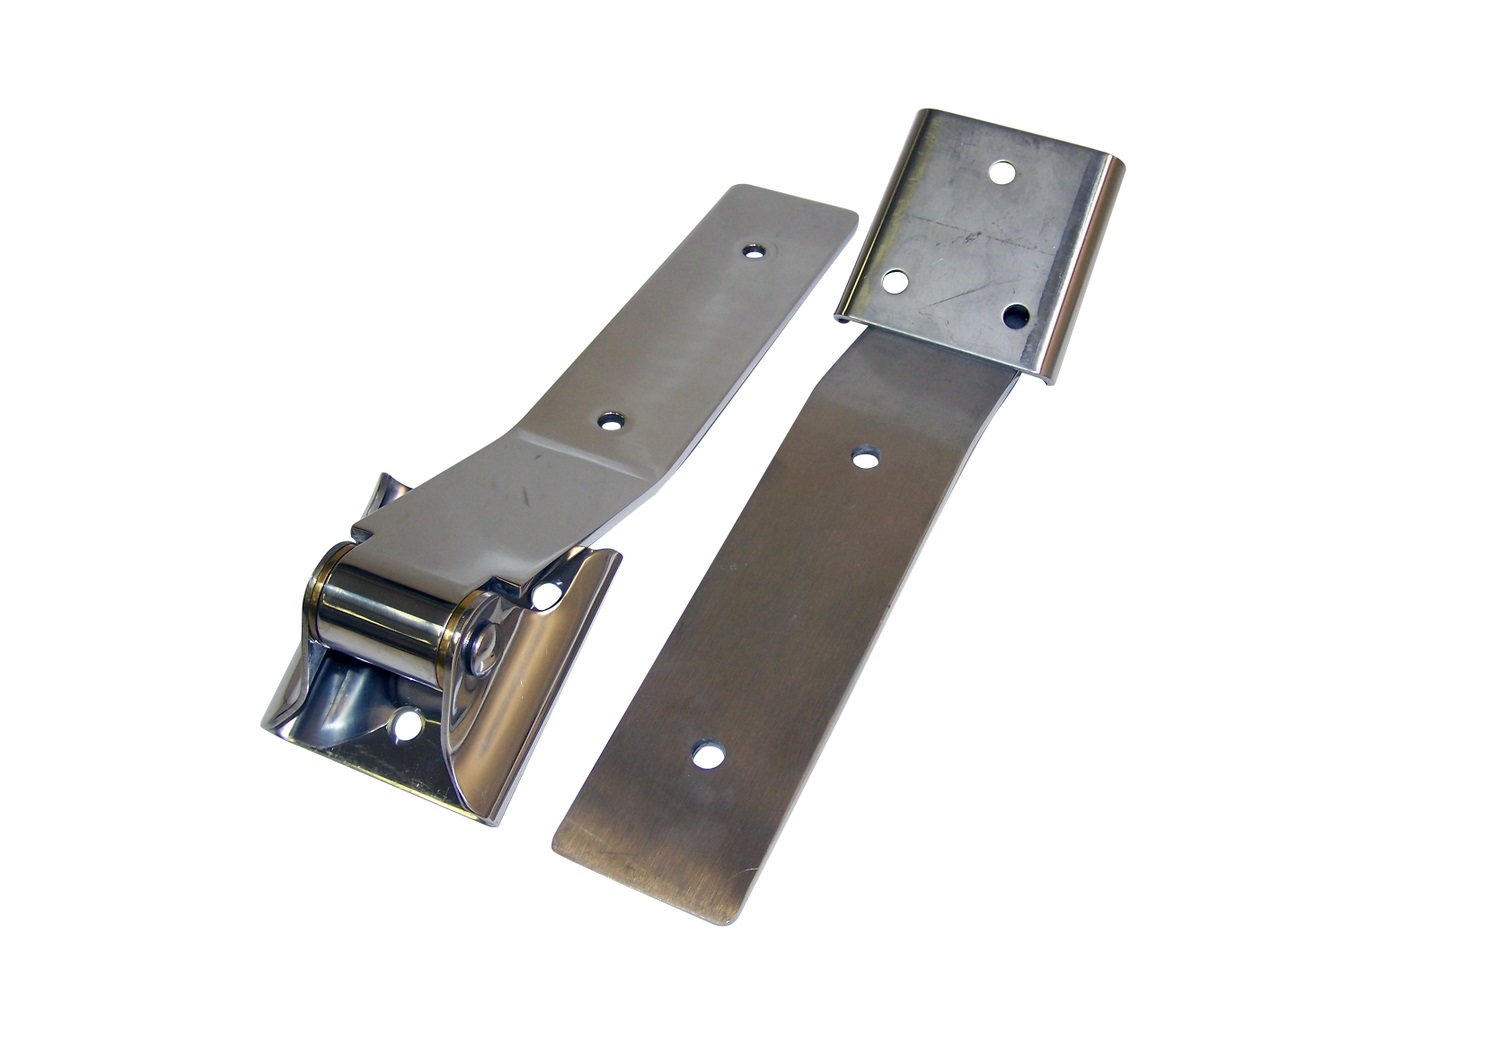 UPC 848399000030 product image for Automotive 8404 Tailgate Hinge Set  Stainless Steel  Incl. 2 Hinges | upcitemdb.com